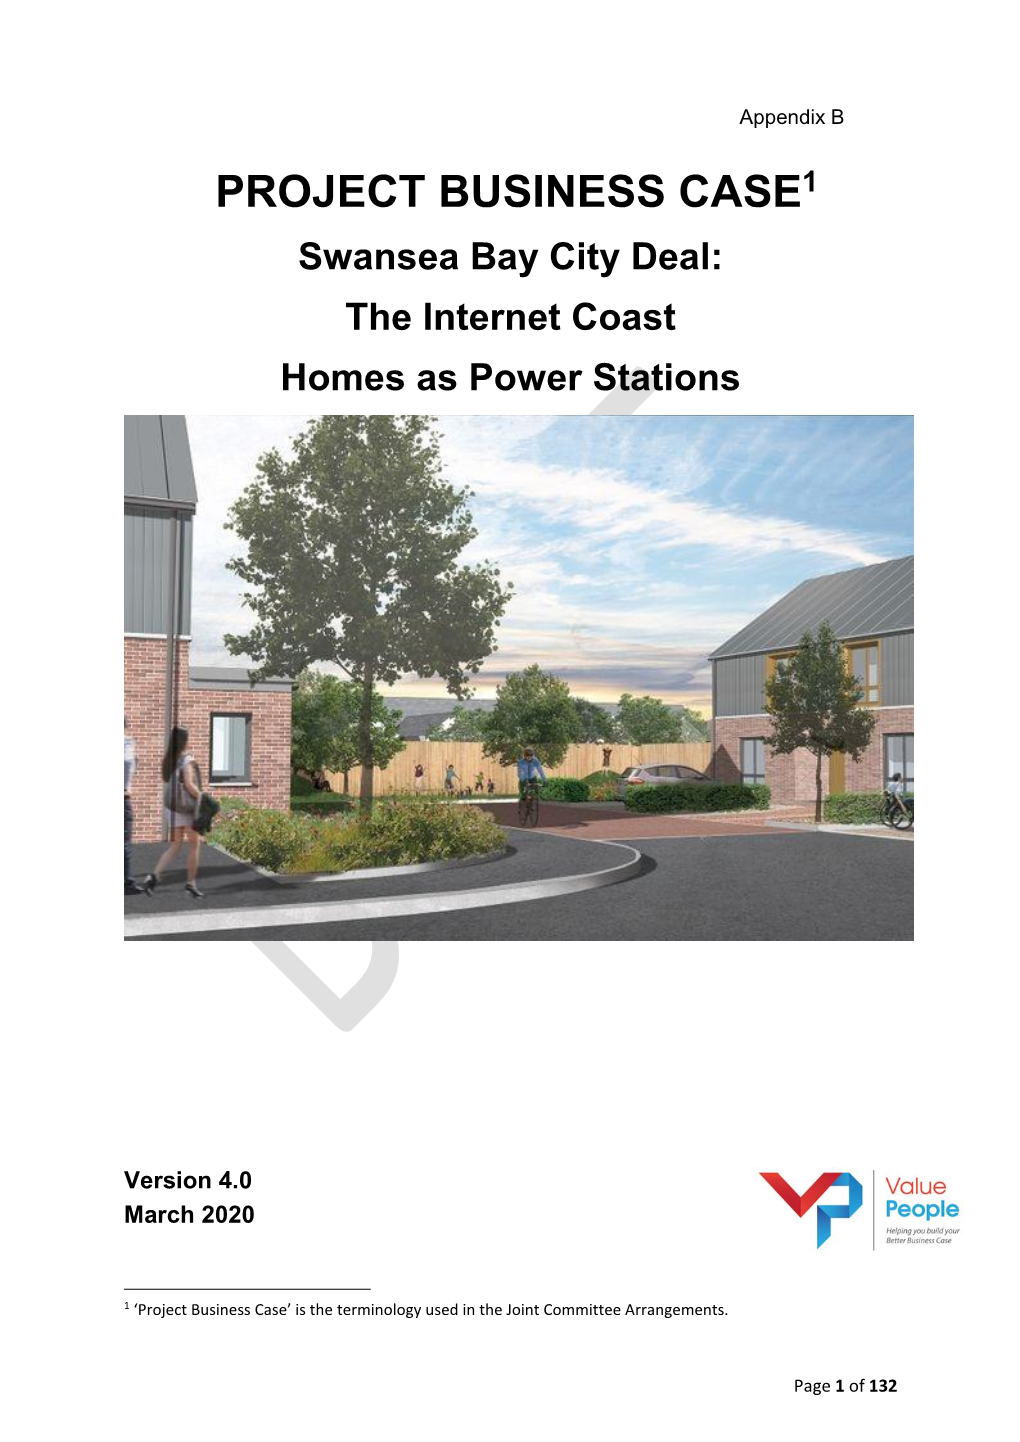 PROJECT BUSINESS CASE1 Swansea Bay City Deal: the Internet Coast Homes As Power Stations